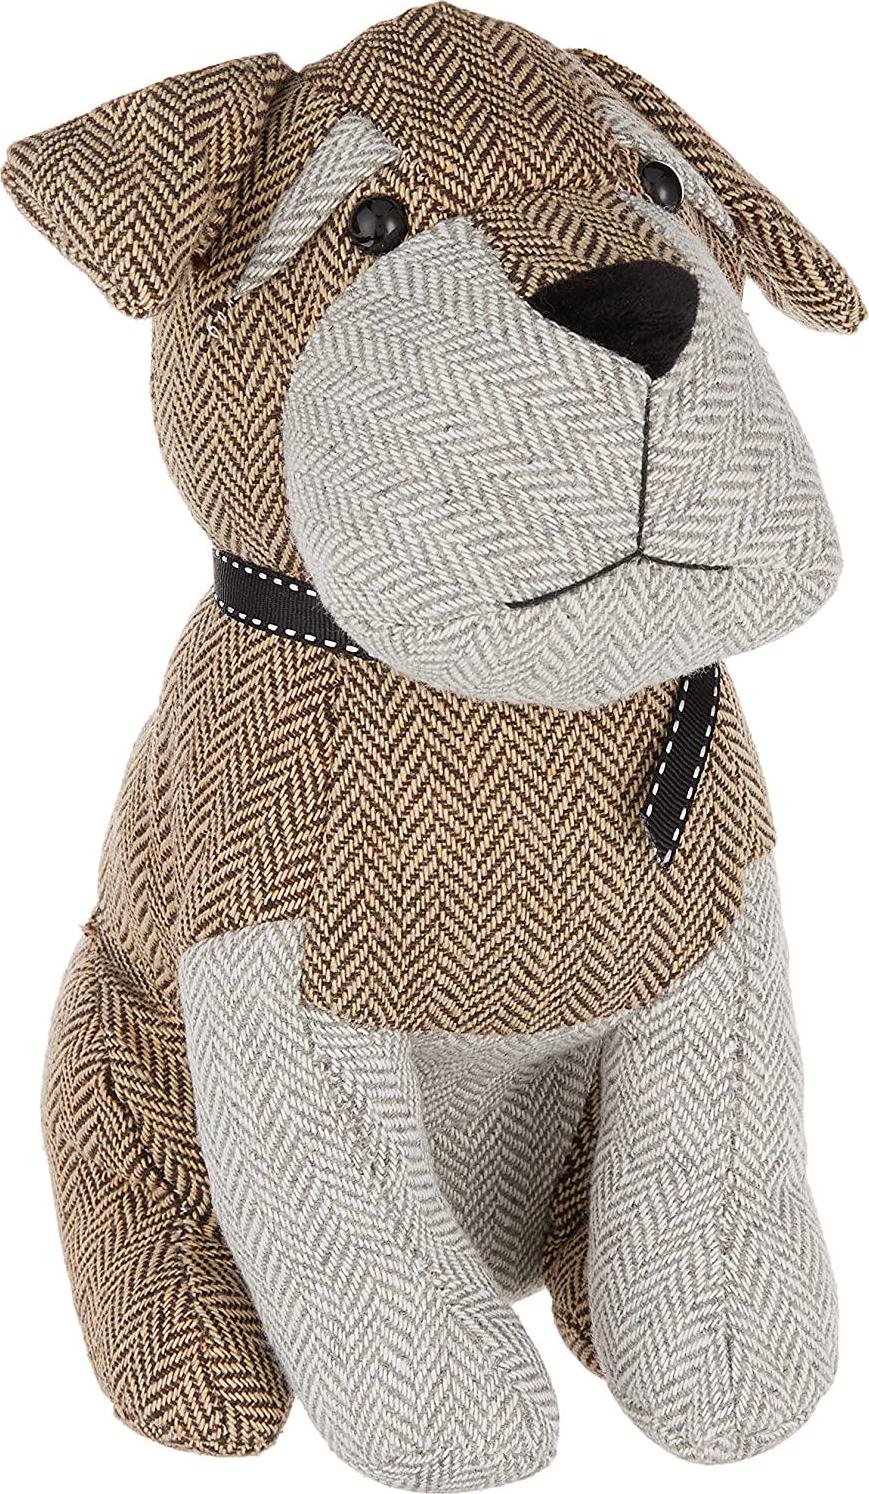 ELEMENTS, Elements Cute Door Stopper for Home and Office - Tweed Brown Dog Weighted Fabric Animal Door Stopper, 10-Inch, Multicolor